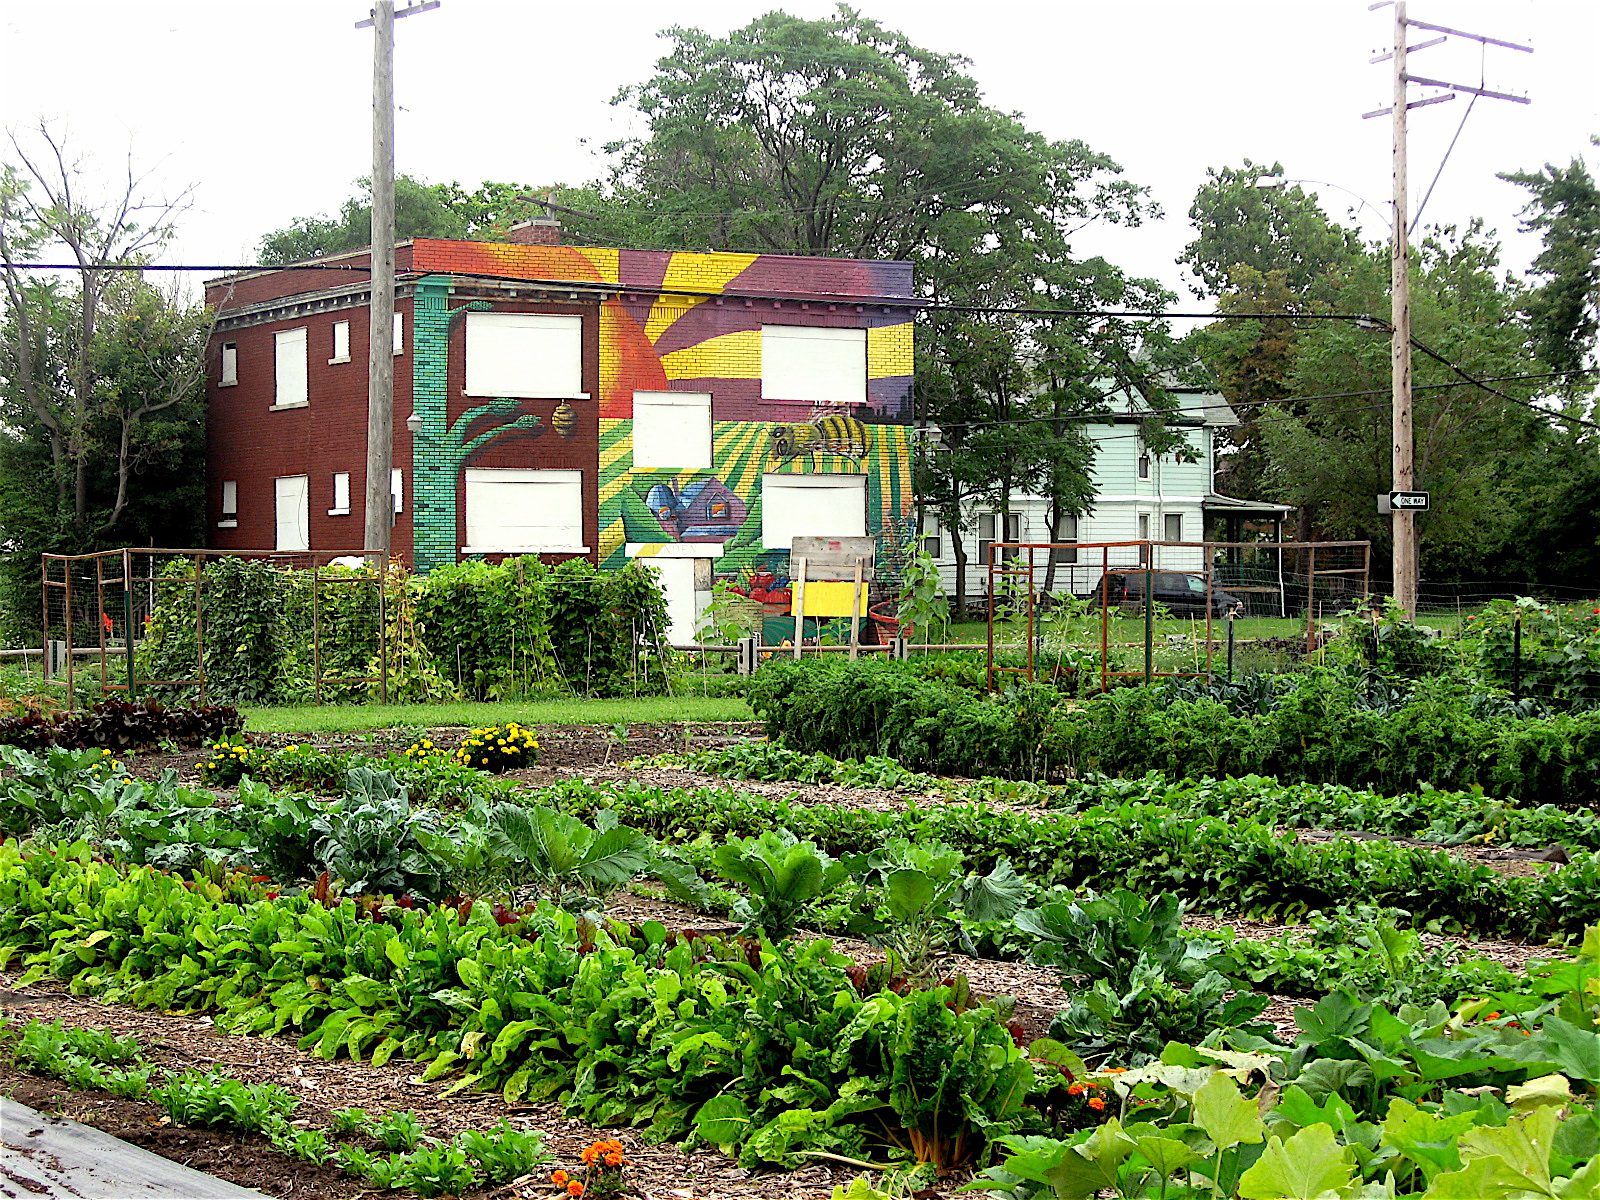 This Area in Detroit is now America’s First 100% Organic, Self-Sustainable Neighborhood